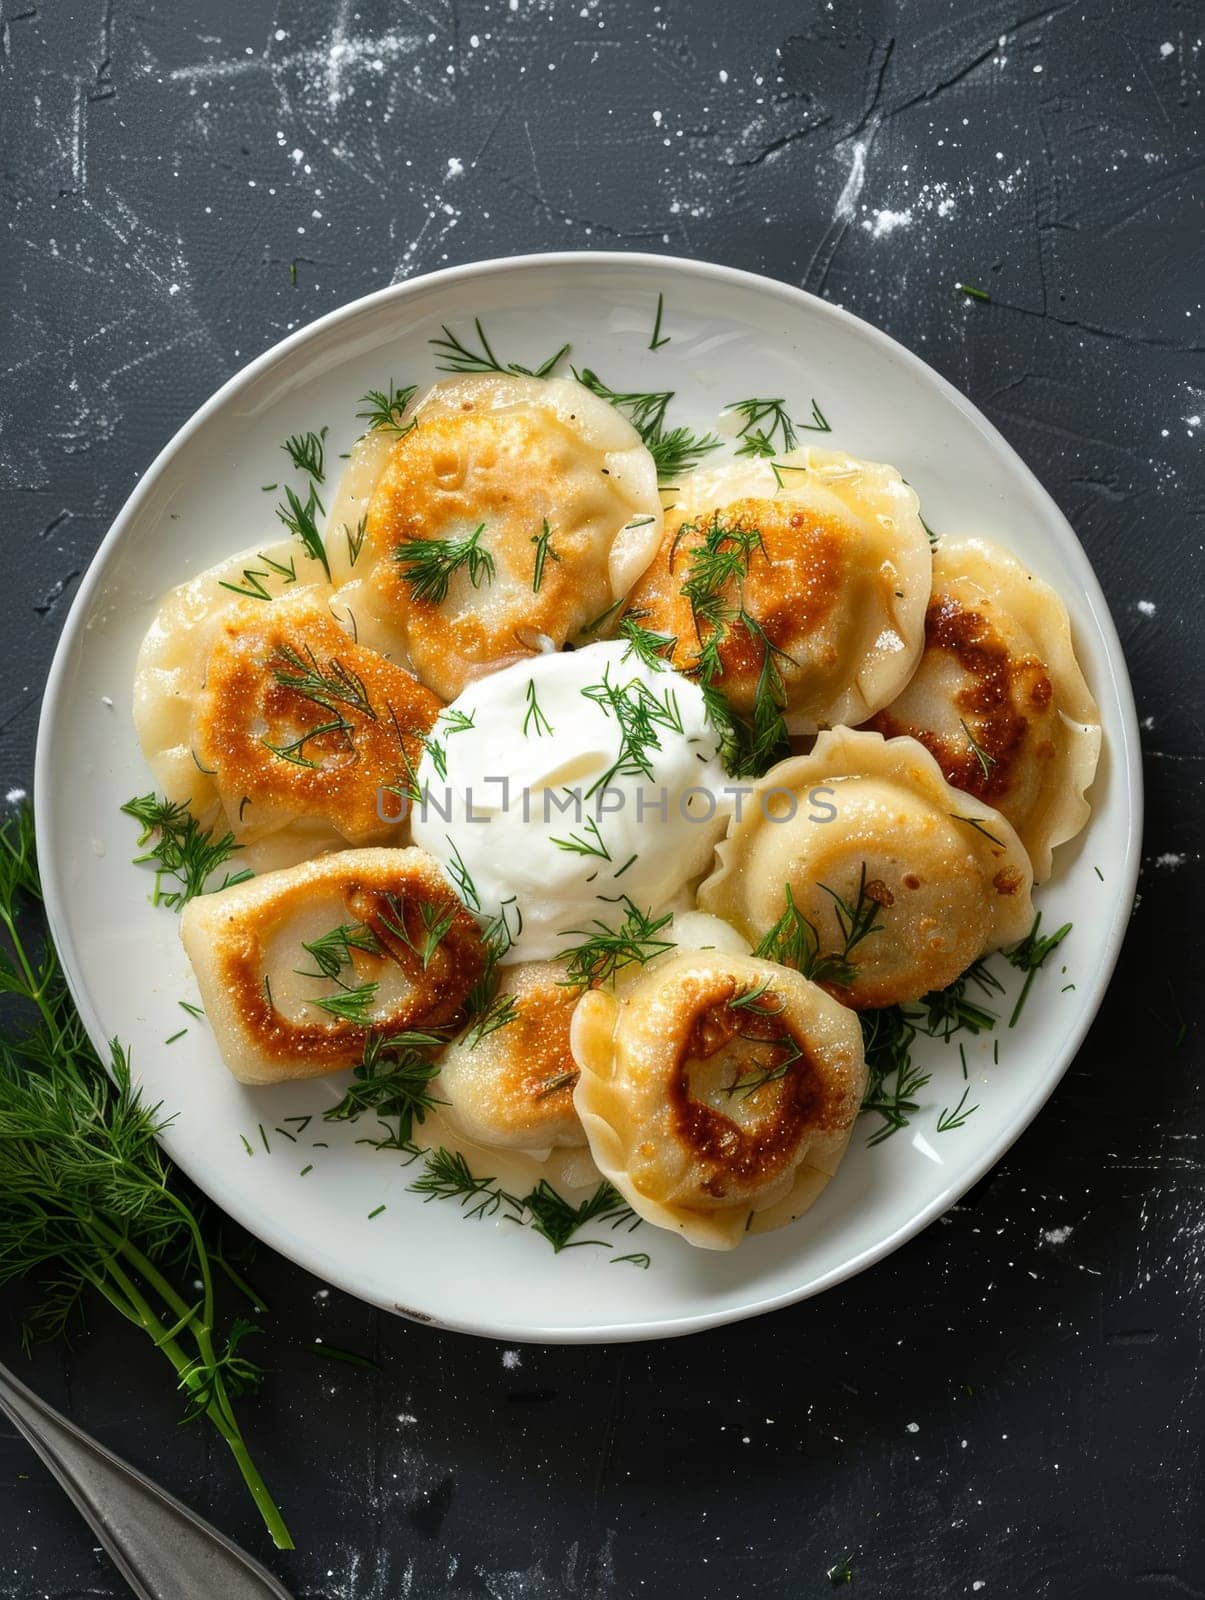 Authentic Polish pierogi, traditional dumplings served on a white plate with a dollop of sour cream and fresh dill - a comforting and delicious representation of Eastern European comfort food